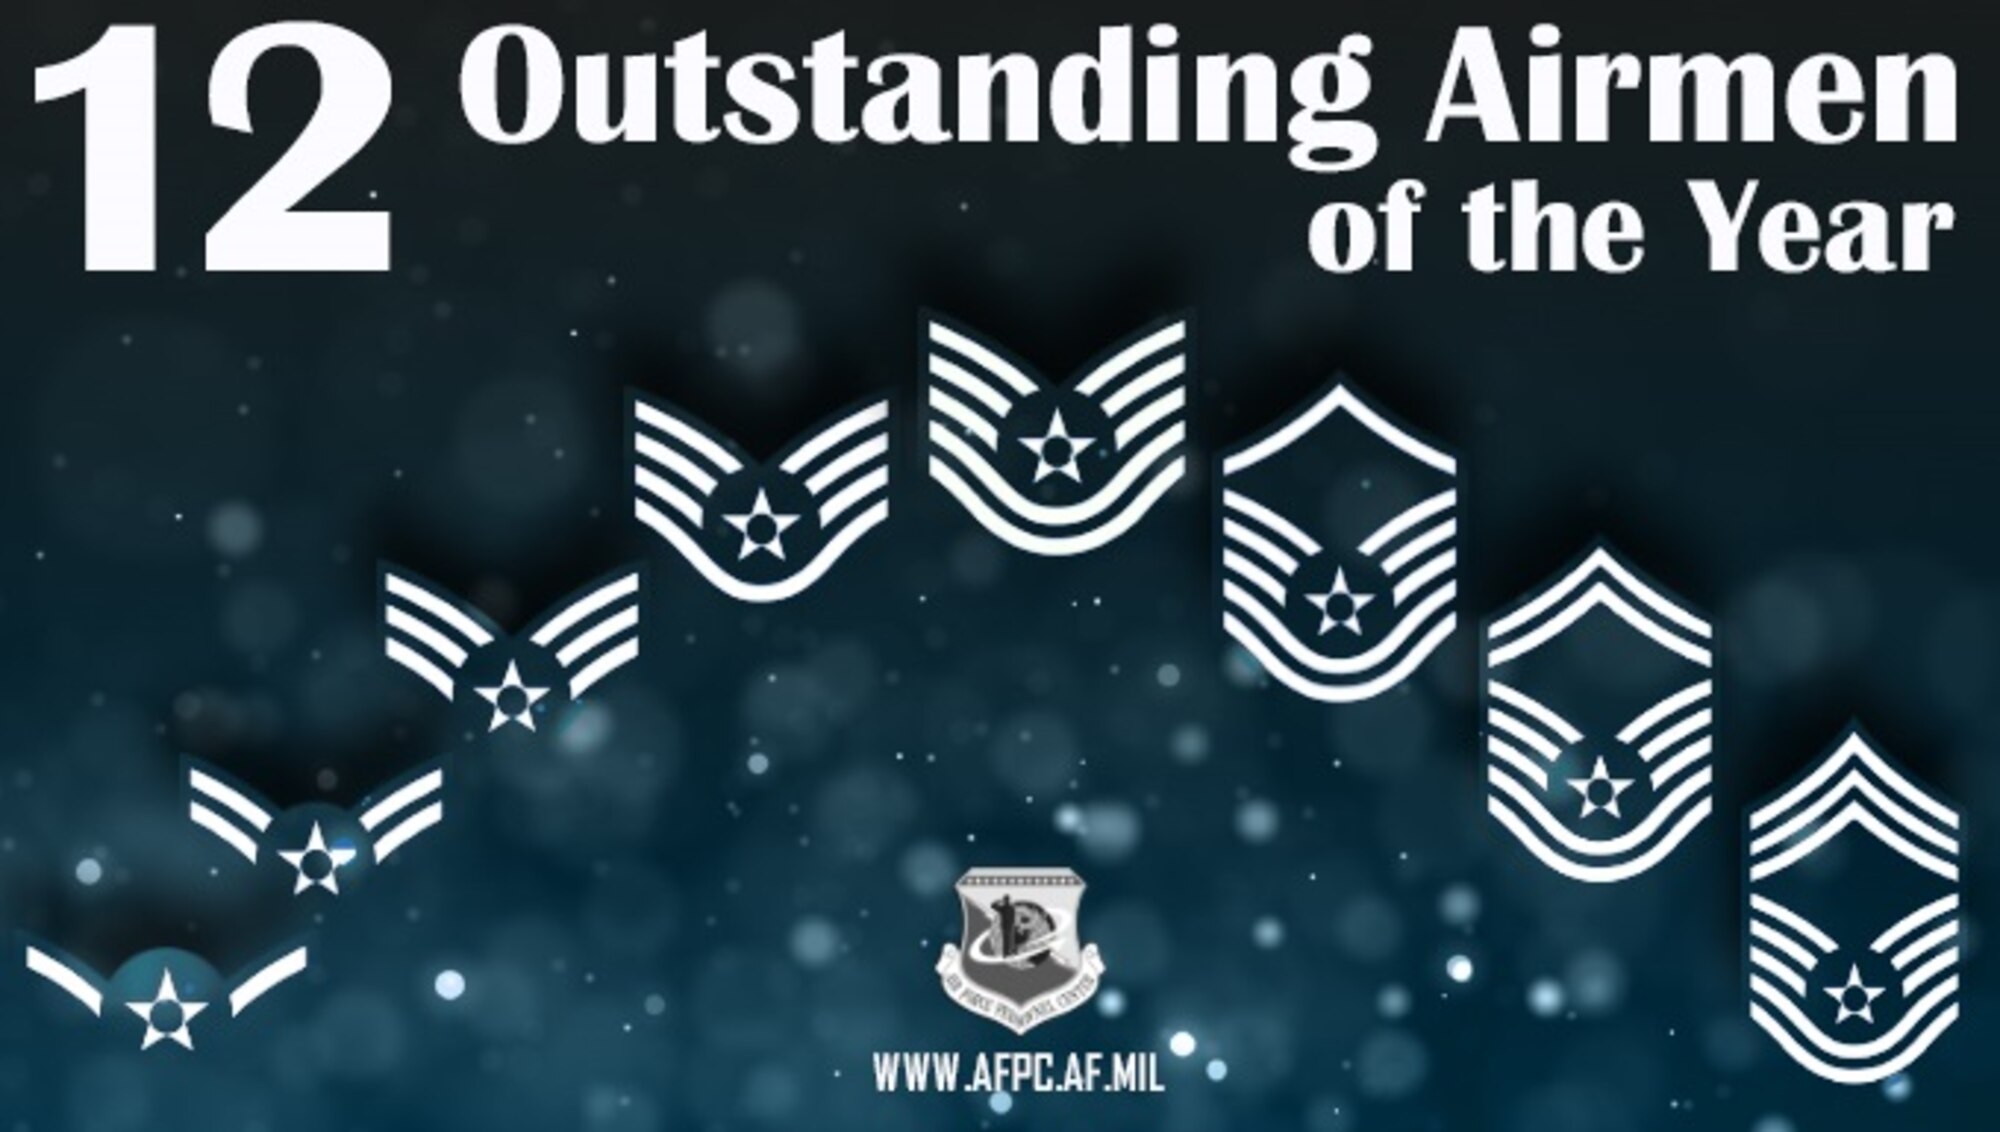 12 Outstanding Airmen of the Year